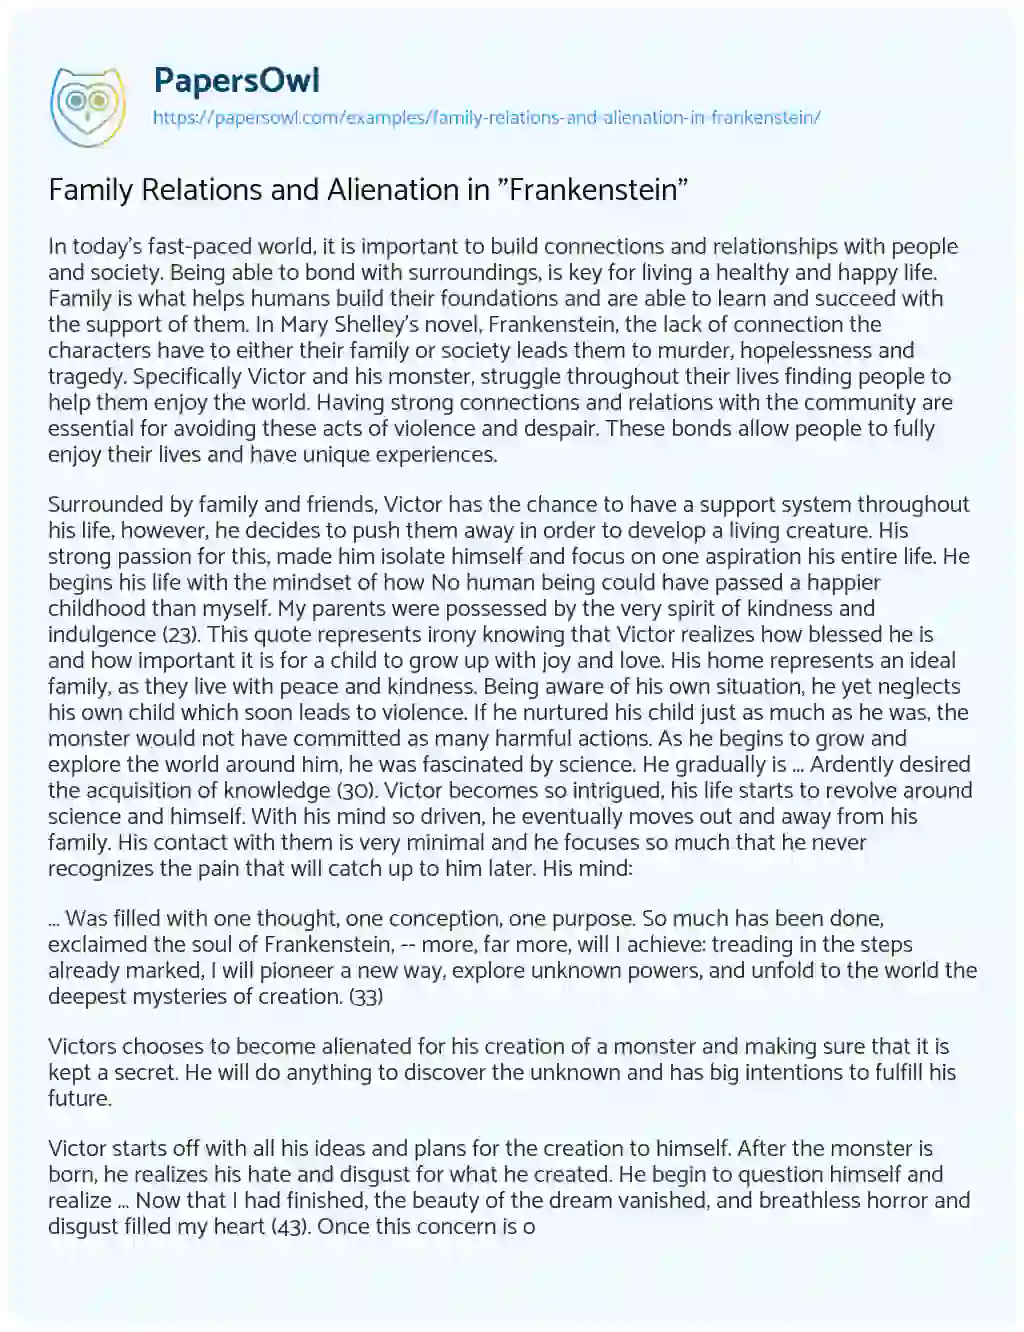 Family Relations and Alienation in “Frankenstein” essay